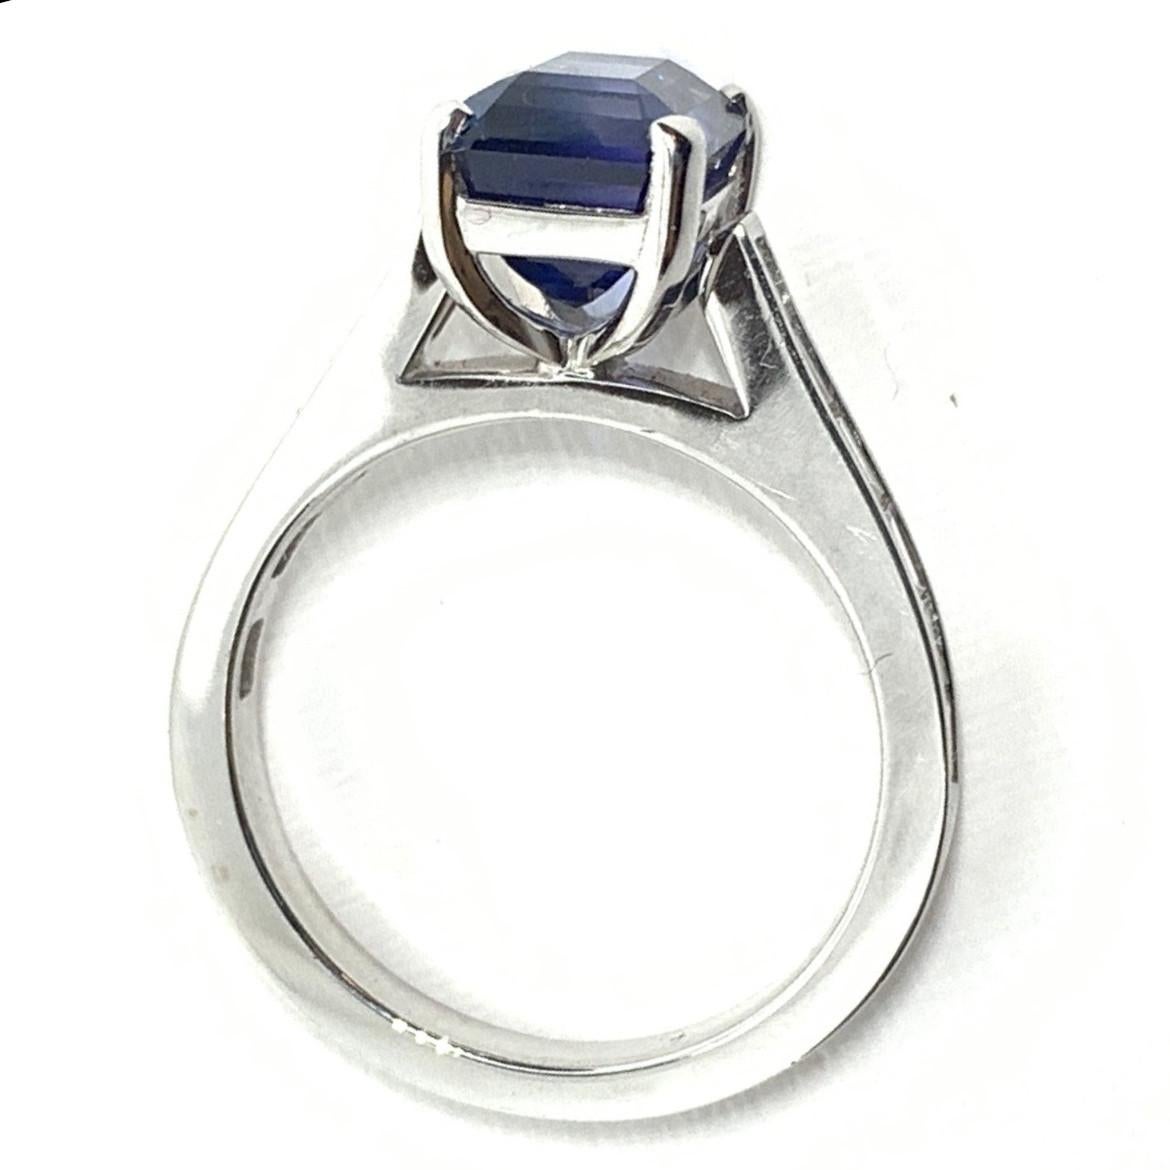 3.94 ct. Blue Sapphire & Channel Set Diamond 18k White Gold Engagement Band Ring 5